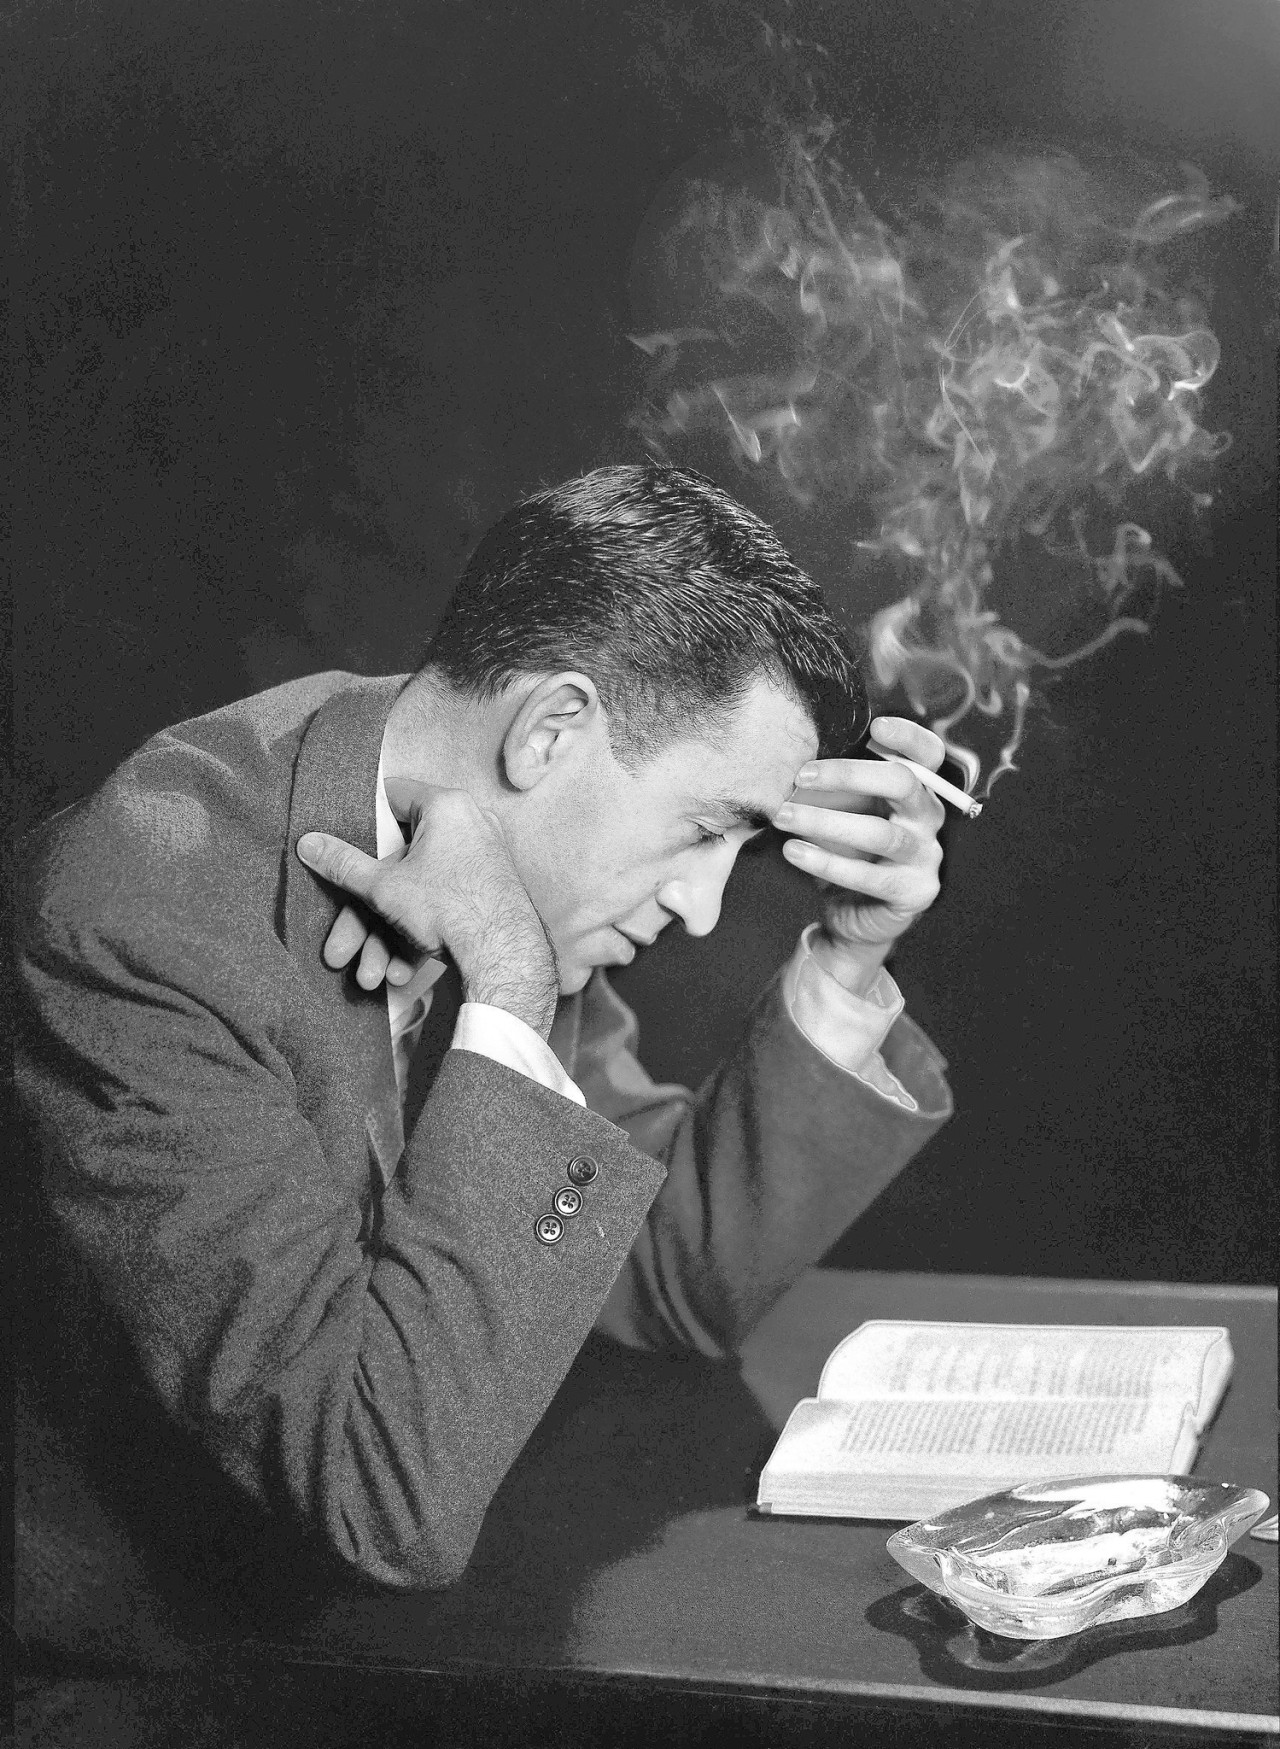 The controversies surrounding the writer jd salinger